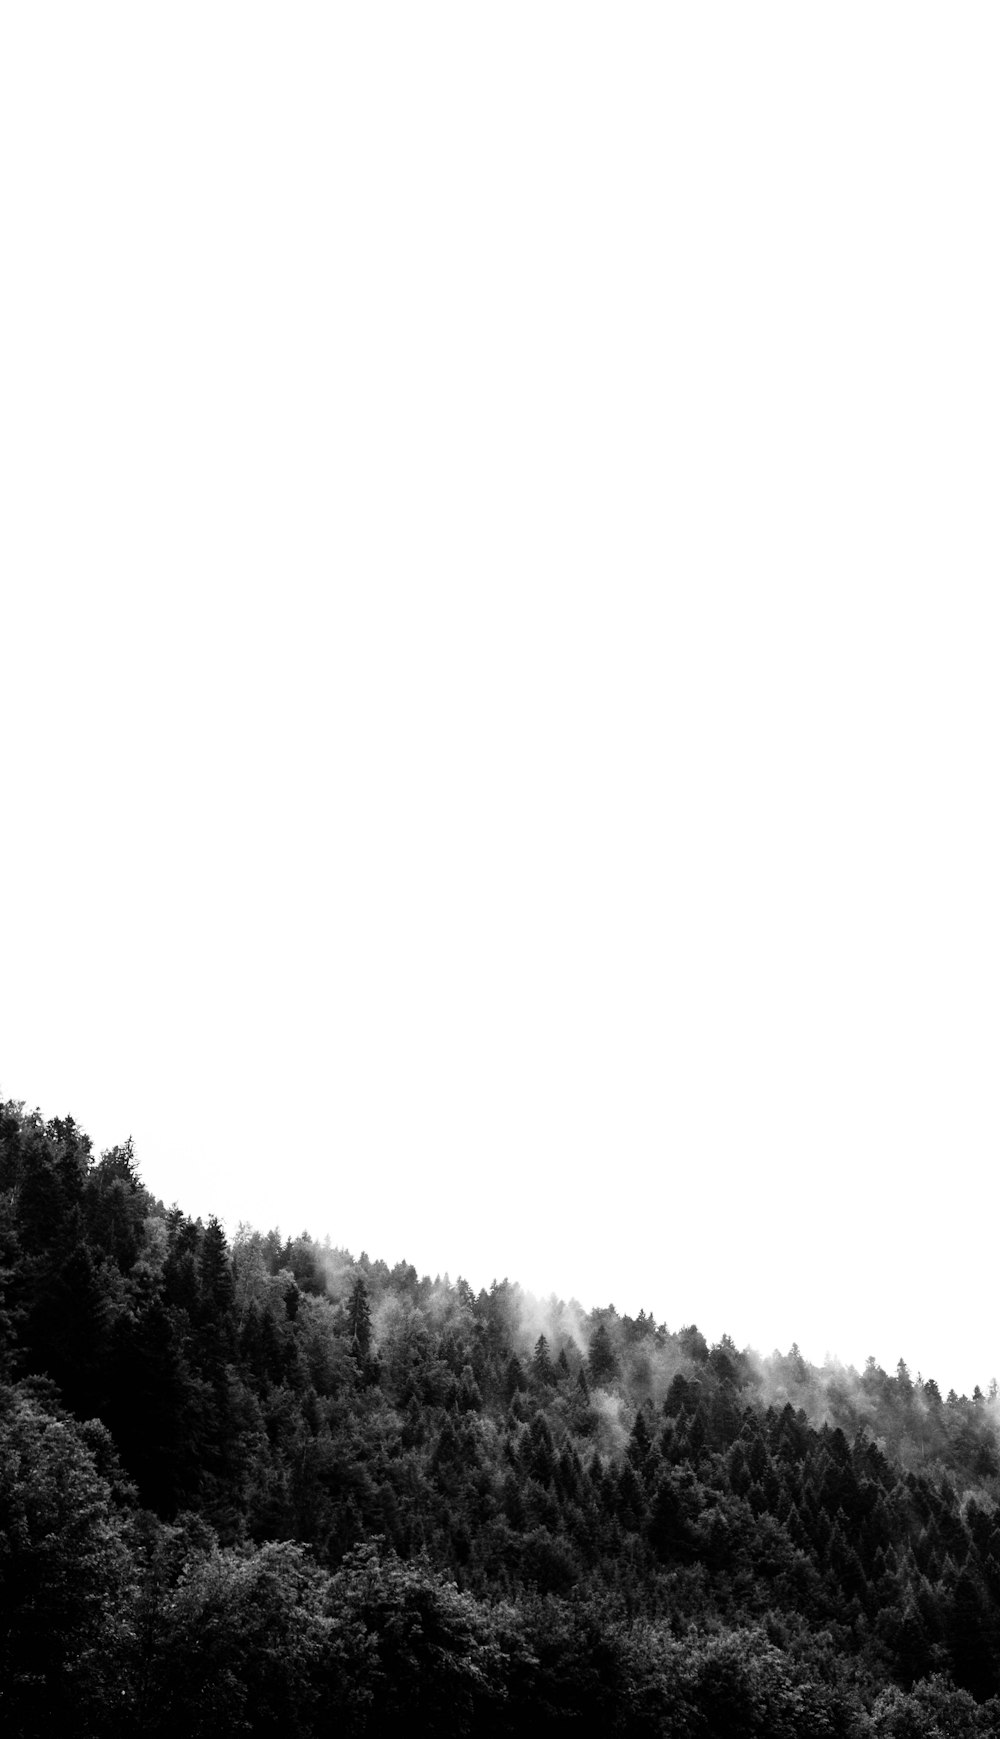 grayscale photo of pine trees